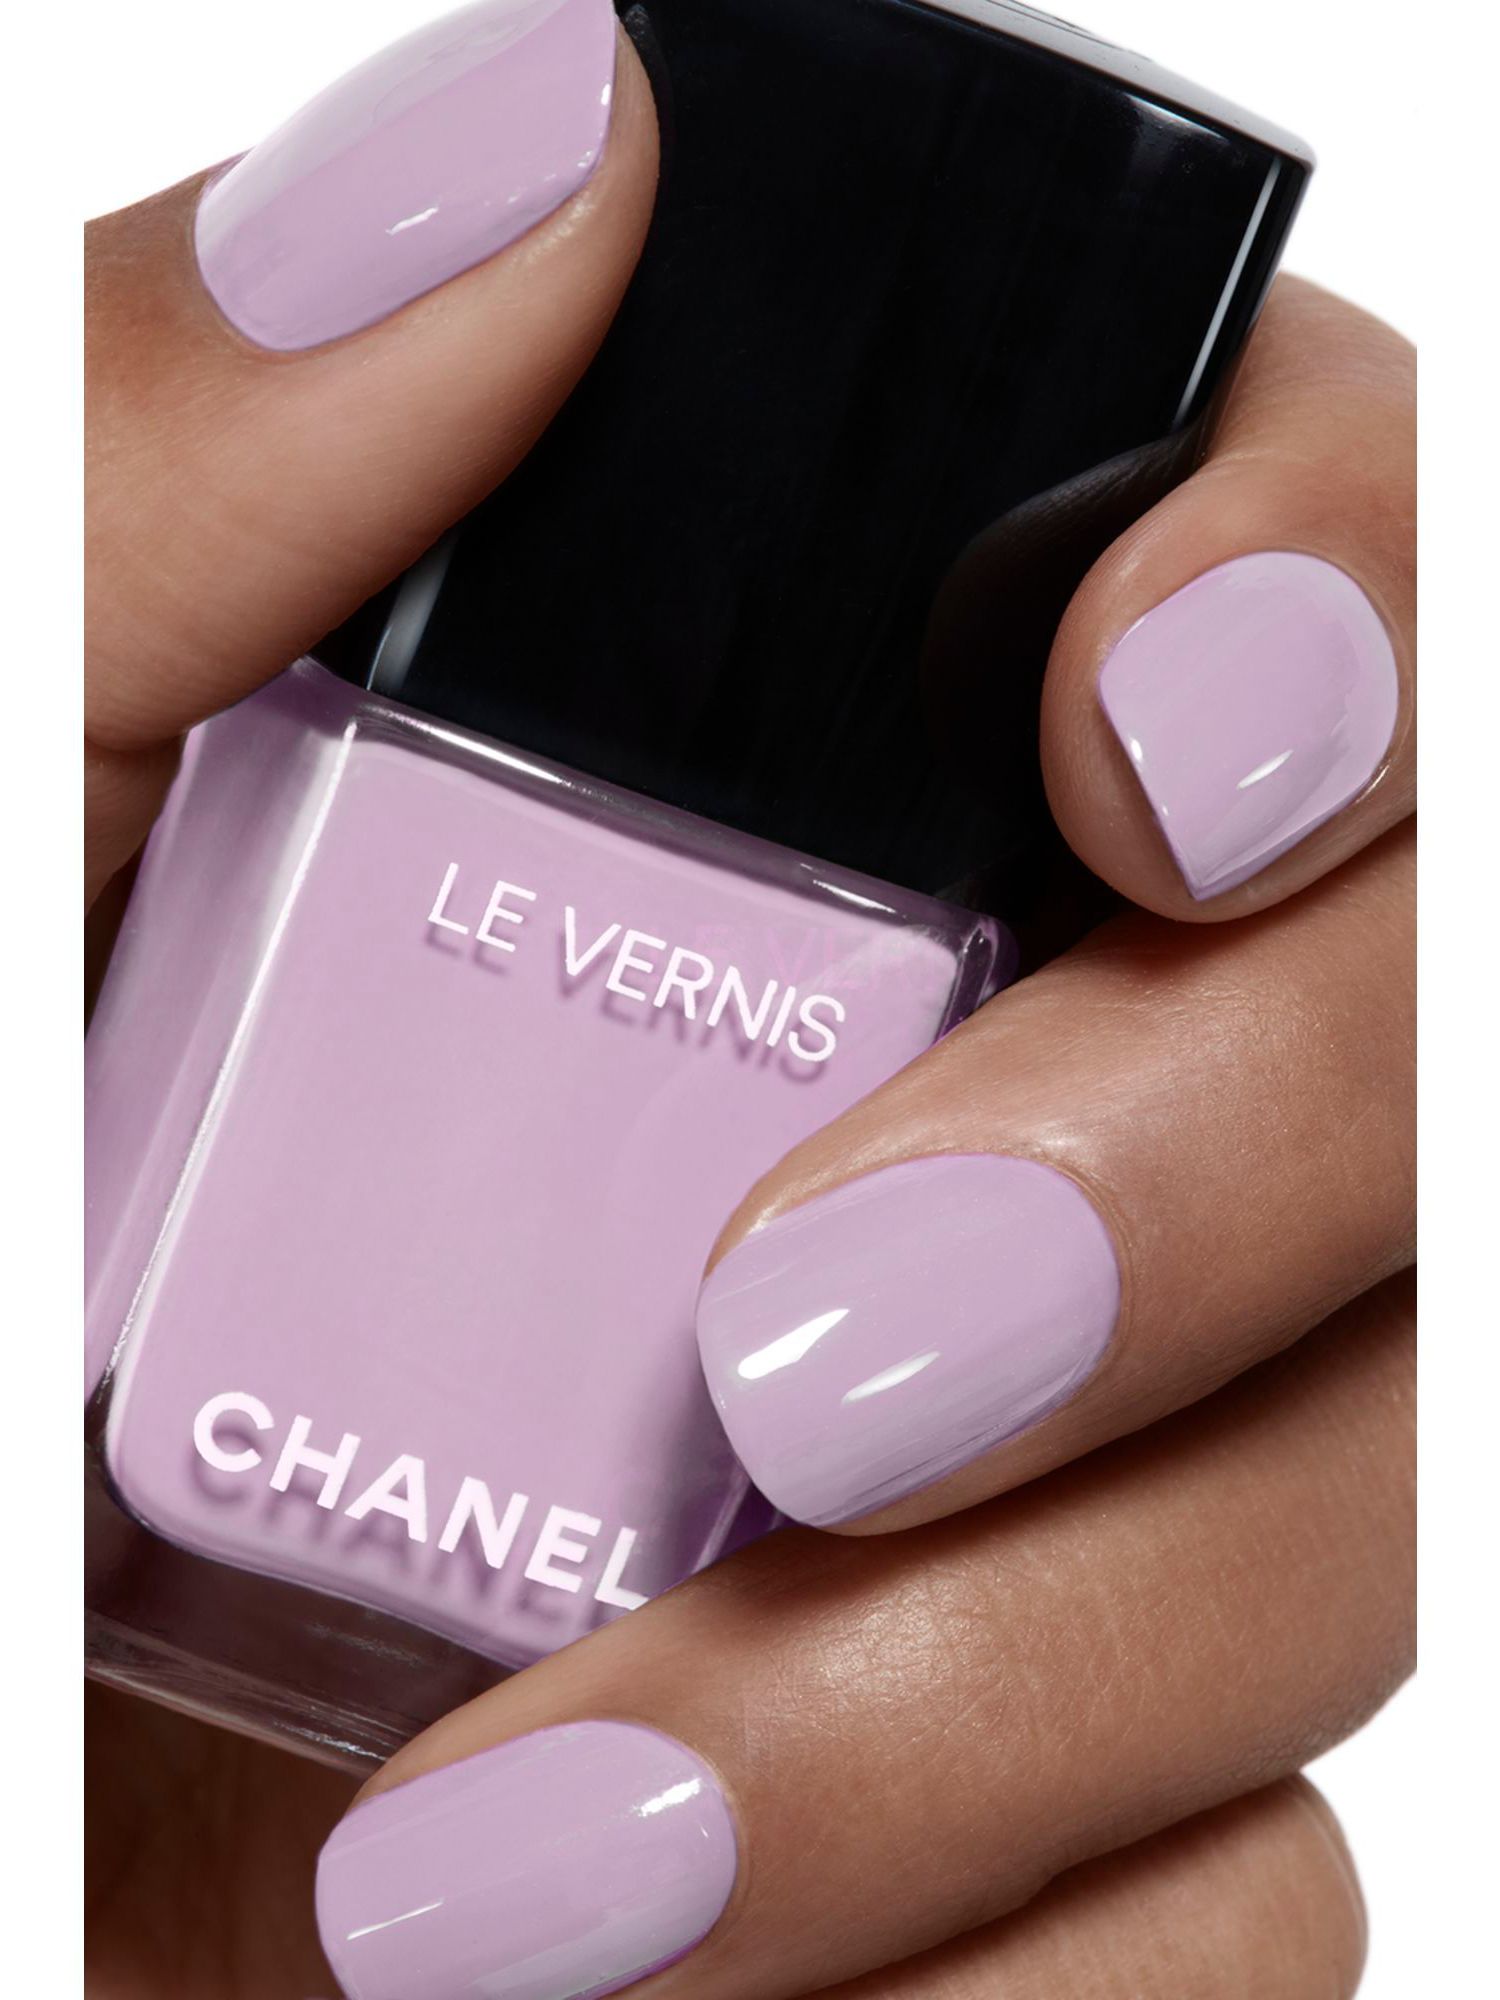 Chanel has just launched nail art stickers and we're obsessed